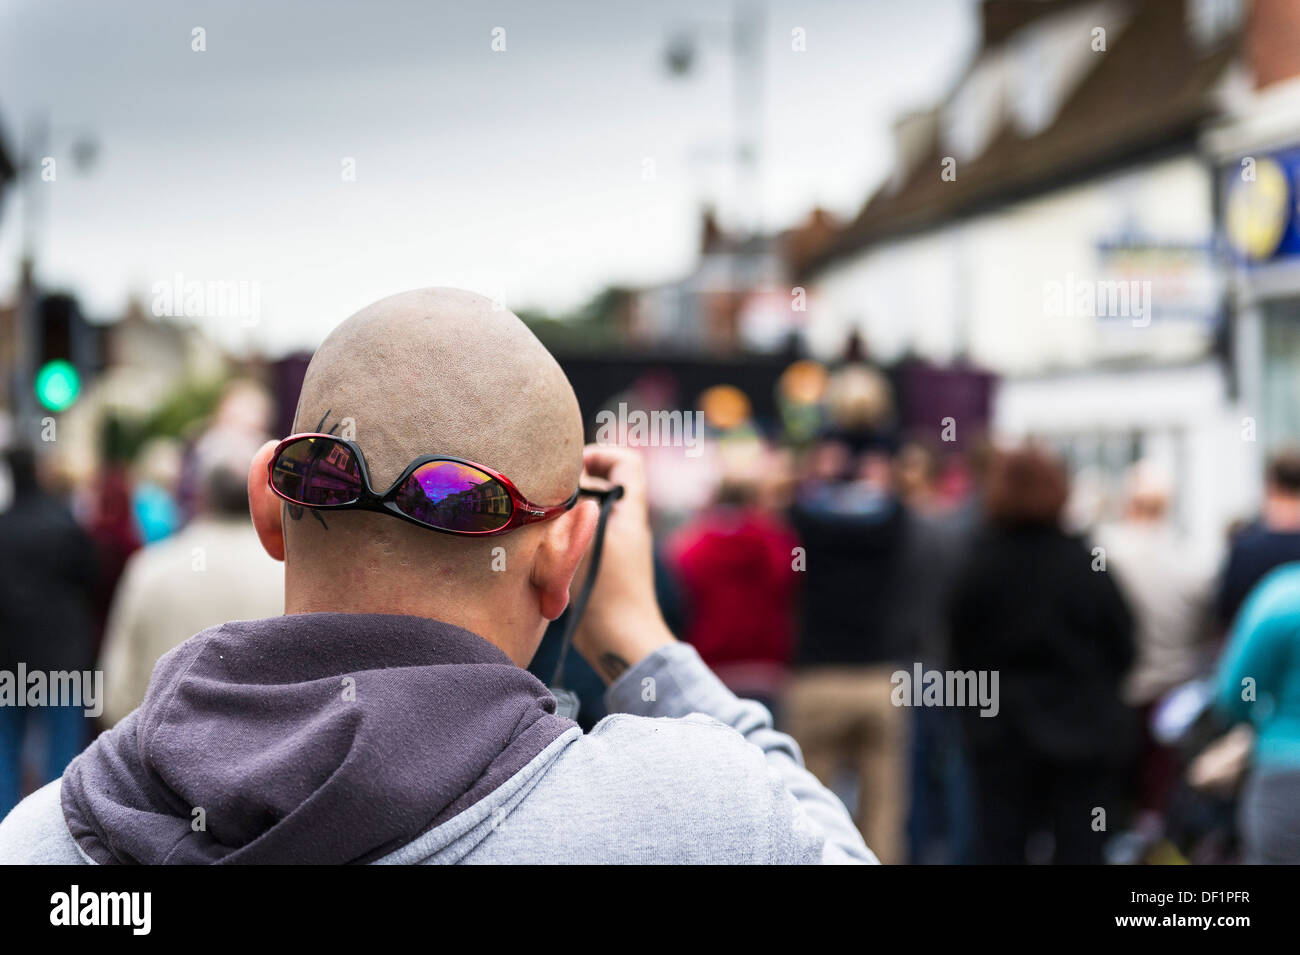 A bald man wearing his sunglasses on the back of his head. Stock Photo